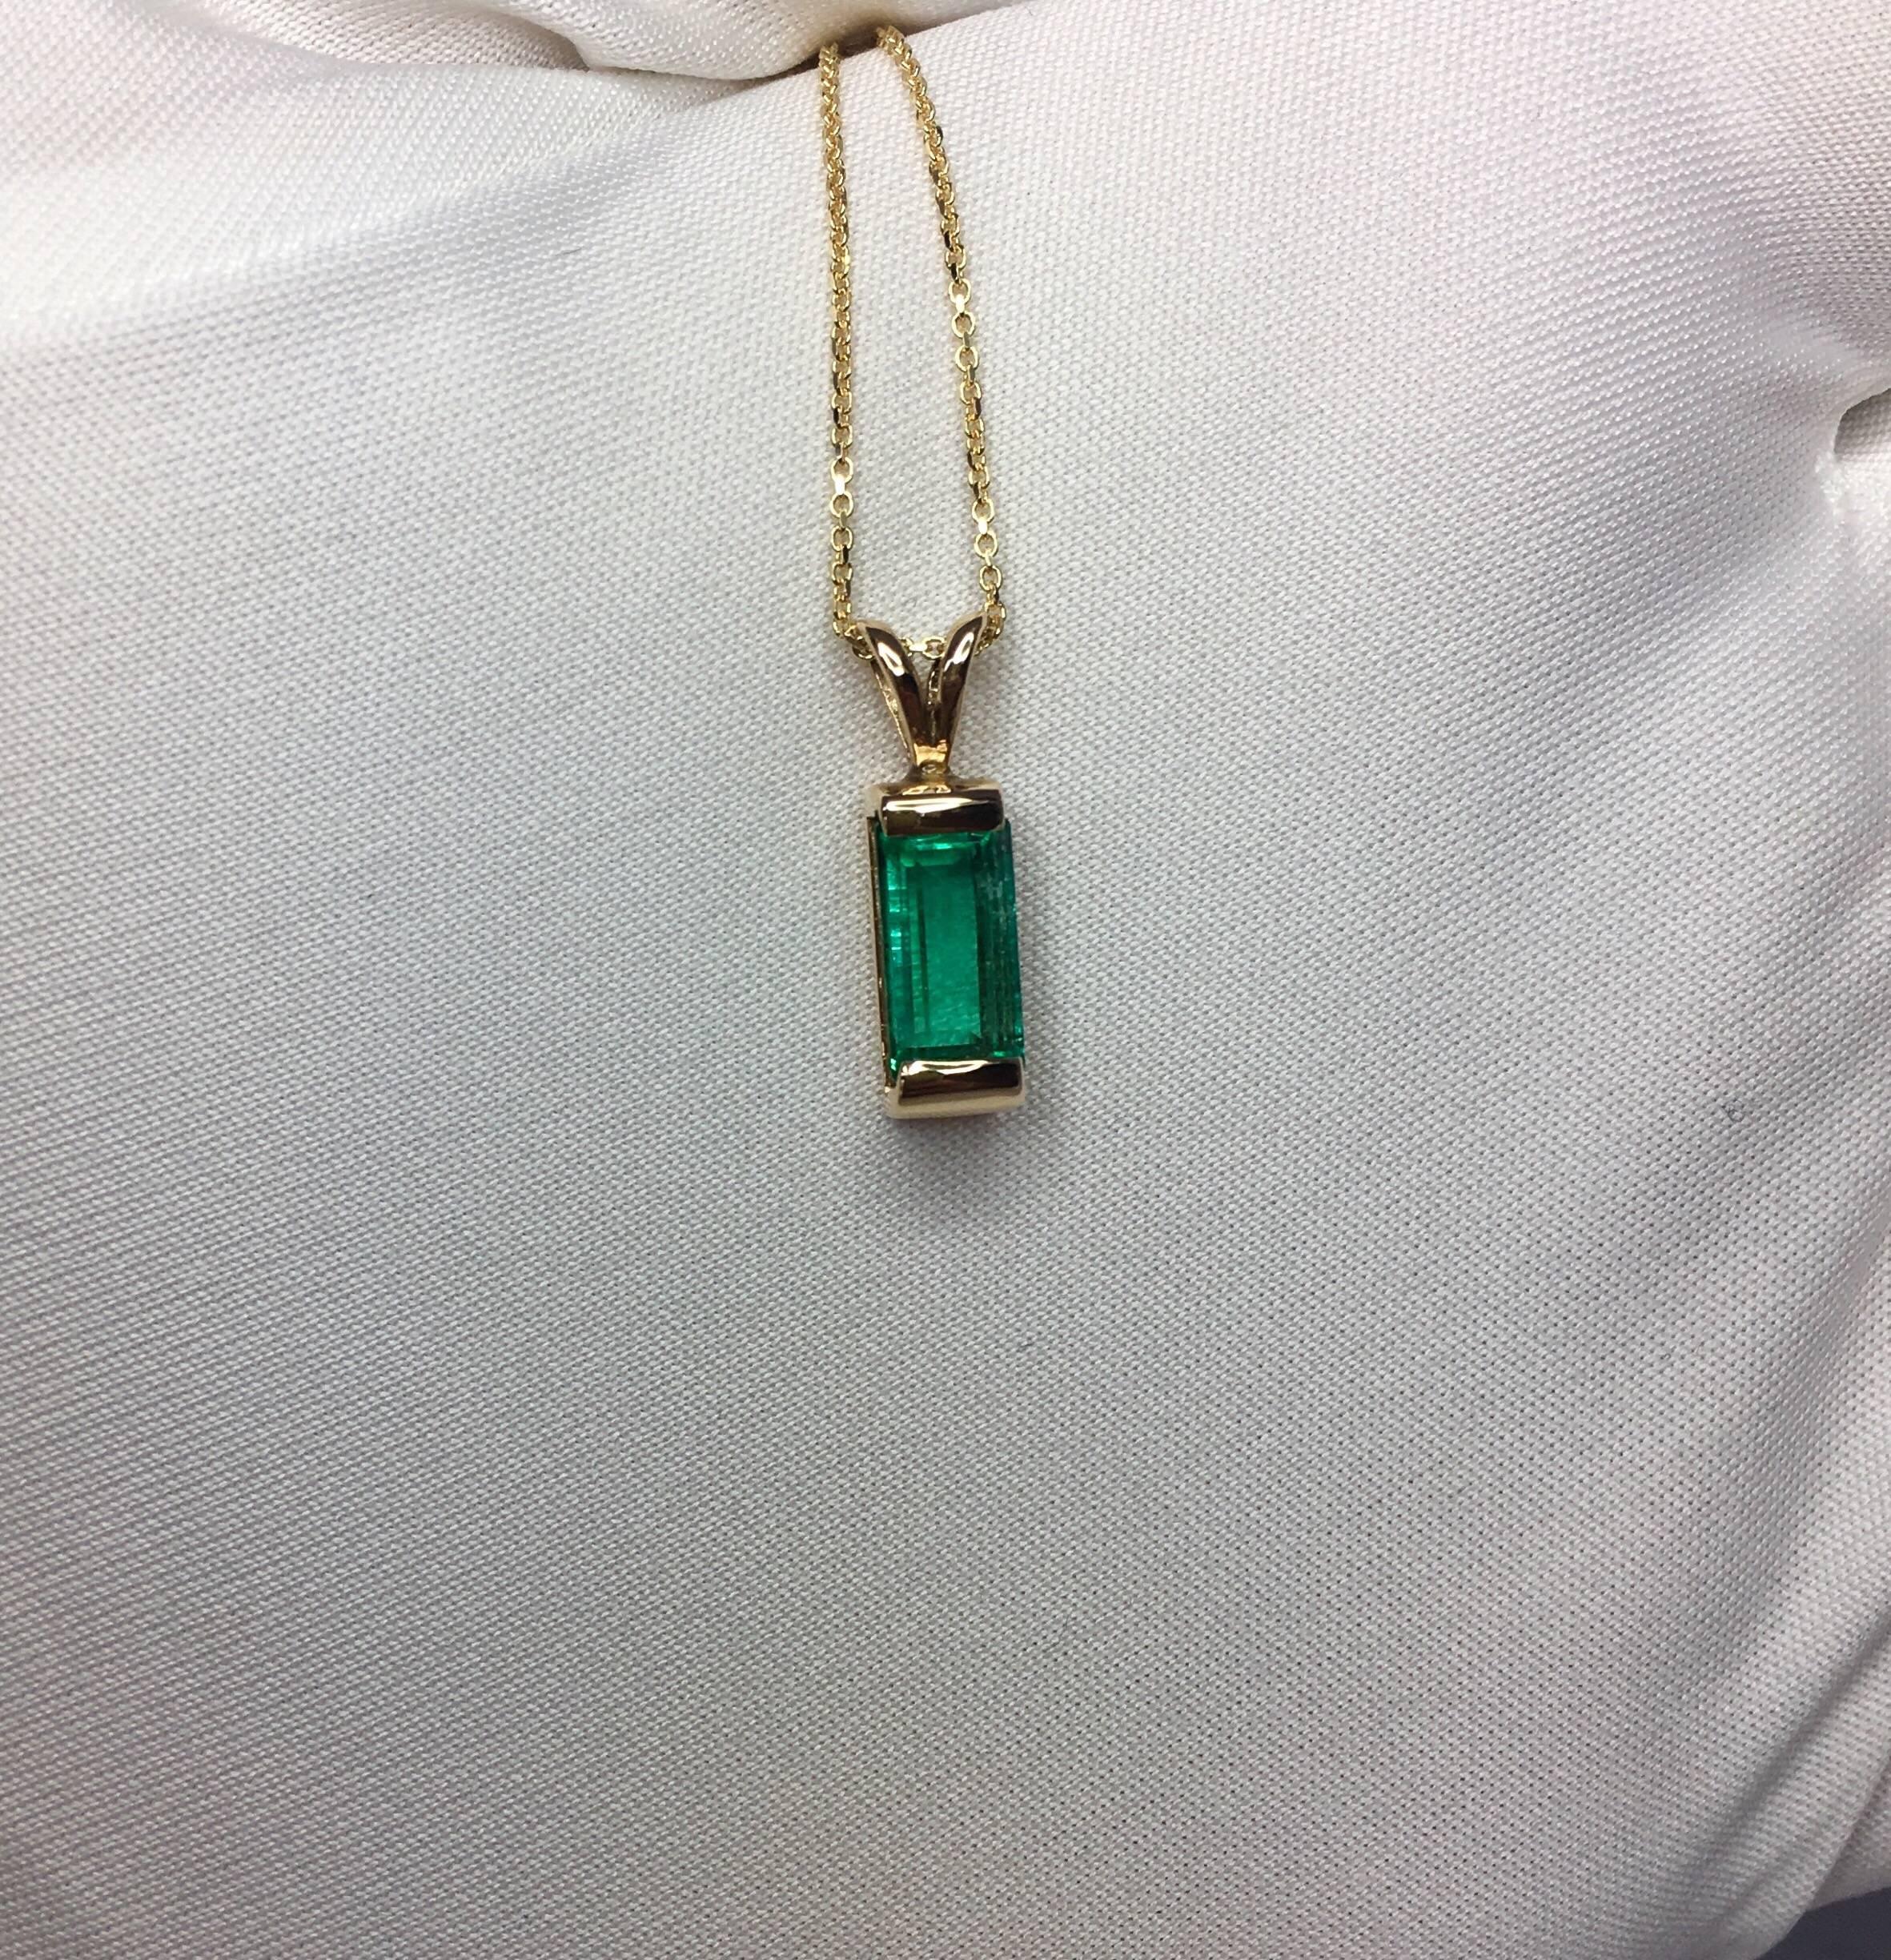 Fine natural vivid green Colombian emerald solitaire pendant.

1.52 carat stone with stunning vivid green colour and very good clarity. Obviously some inclusions as to be expected with natural emeralds, but a clean stone by emerald standards. Also